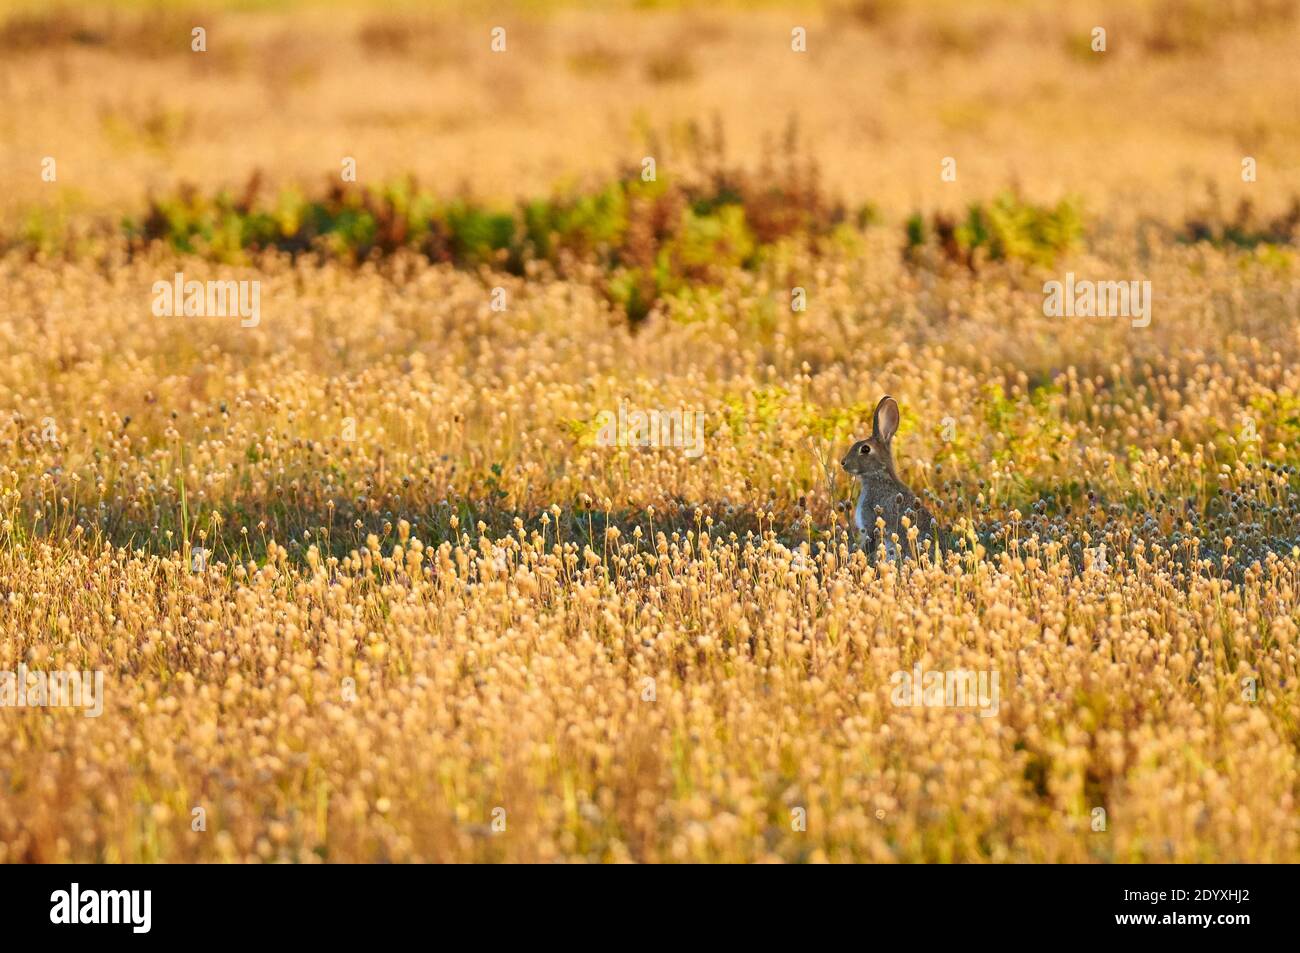 European rabbit (Oryctolagus cuniculus) surrounded by blooming mediterranean plantain (Plantago lagopus) (Ses Salines Natural Park, Formentera, Spain) Stock Photo